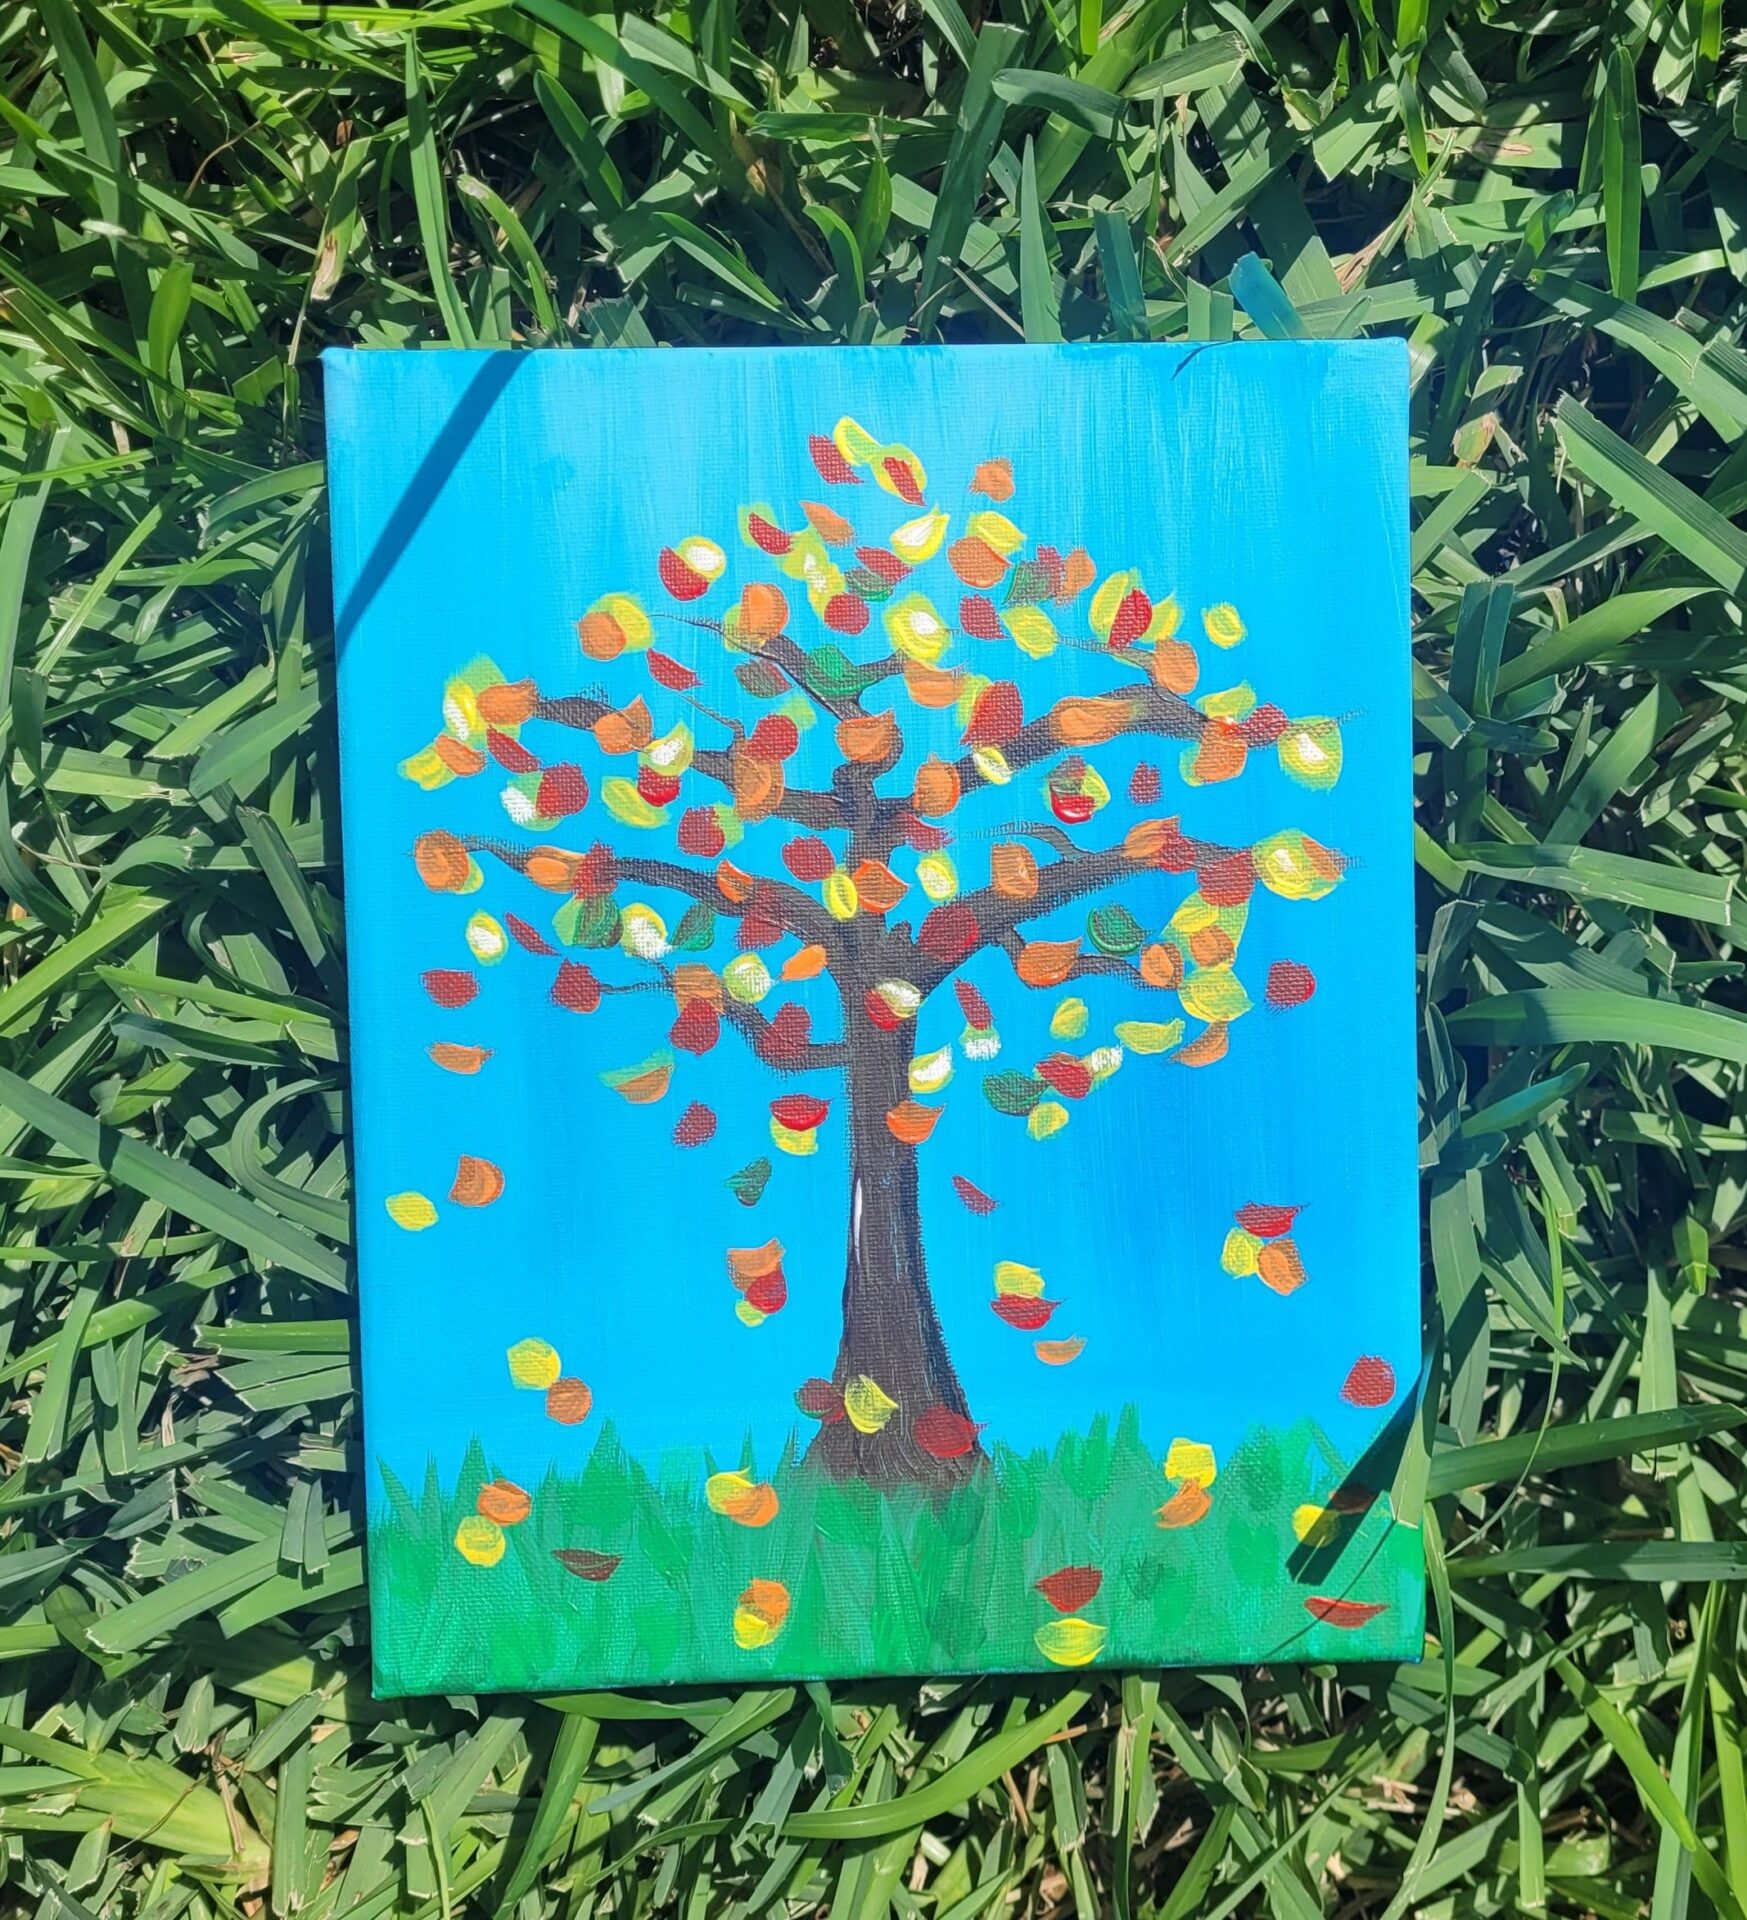 A Fall Theme Painting on a Canvas on Grass